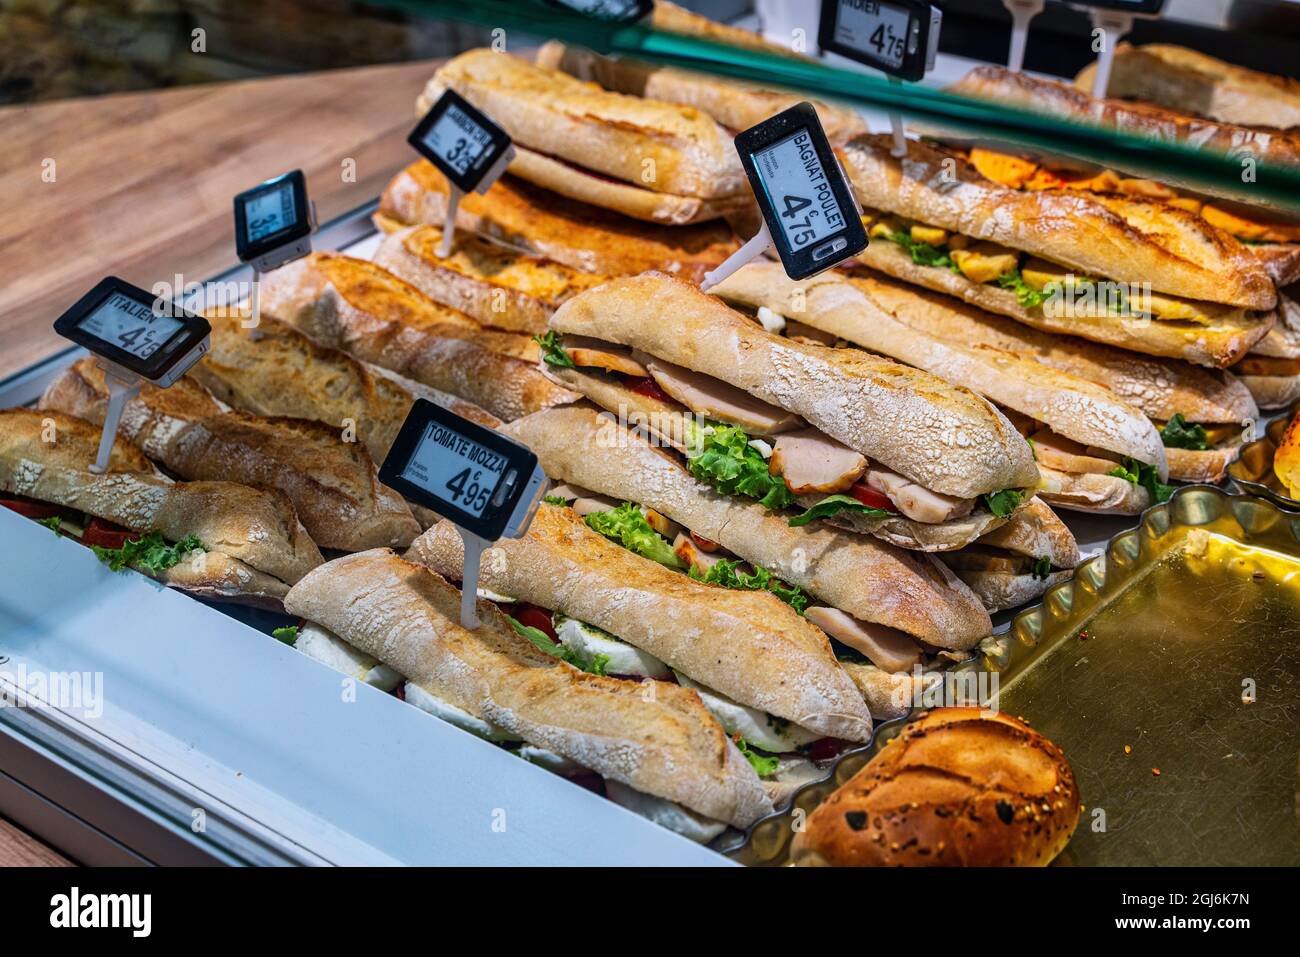 Sandwiches filled with typical products displayed in the window ready for sale. Auvergne-Rhône-Alpes region, Isère département, France, Europe Stock Photo